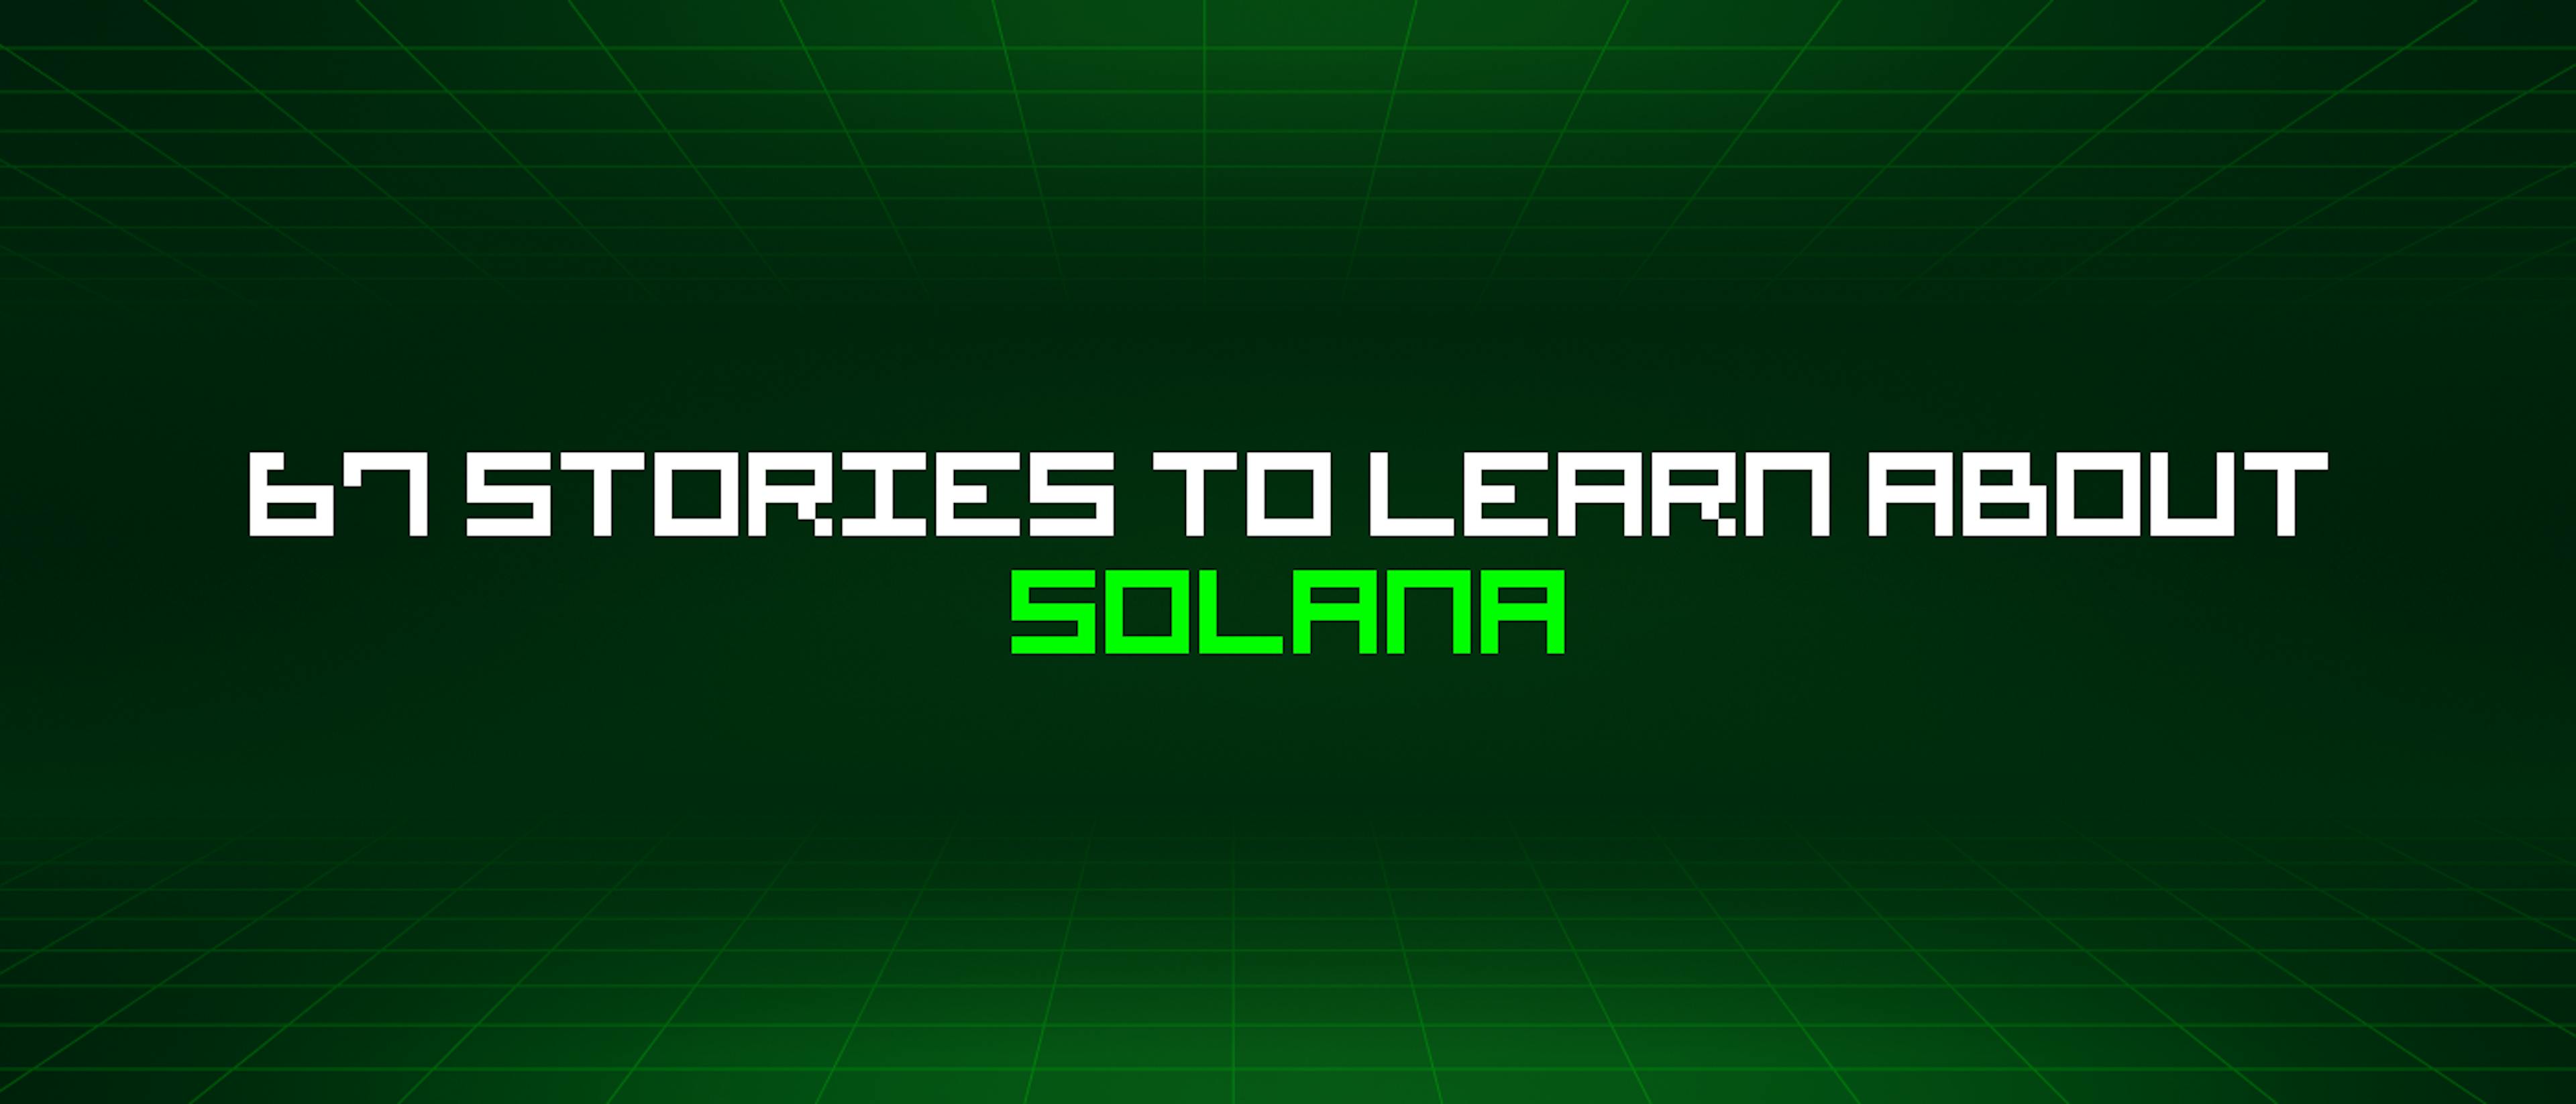 featured image - 67 Stories To Learn About Solana